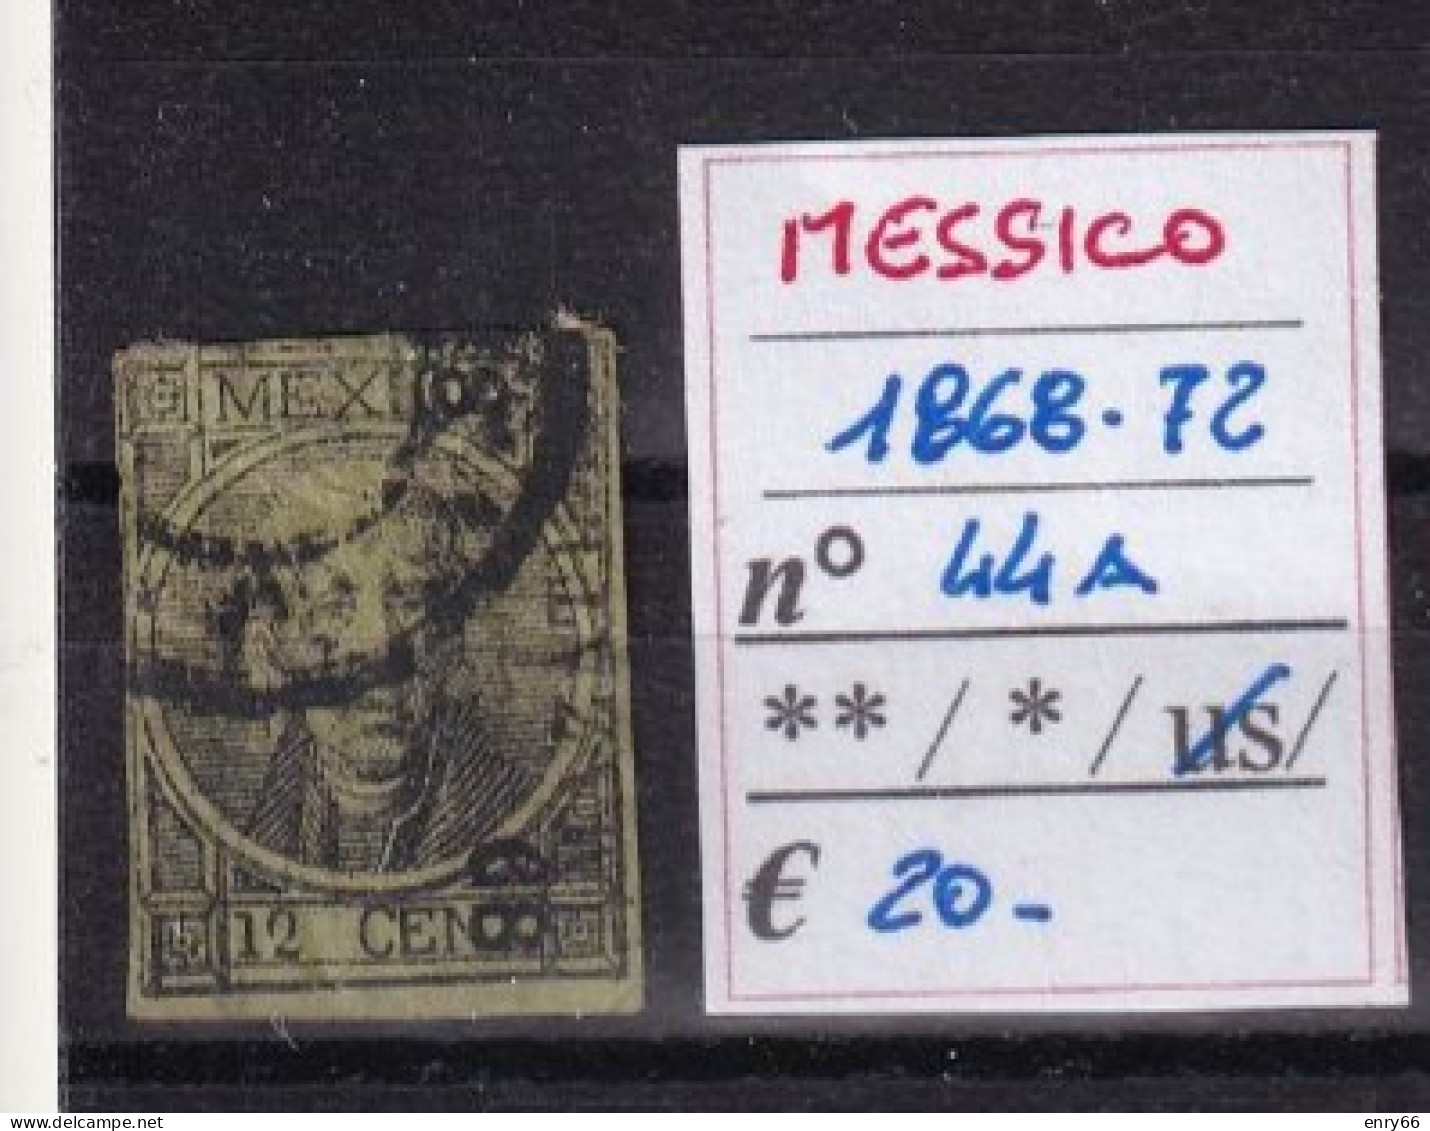 MESSICO 1868-72 N°44A USED - Mexico